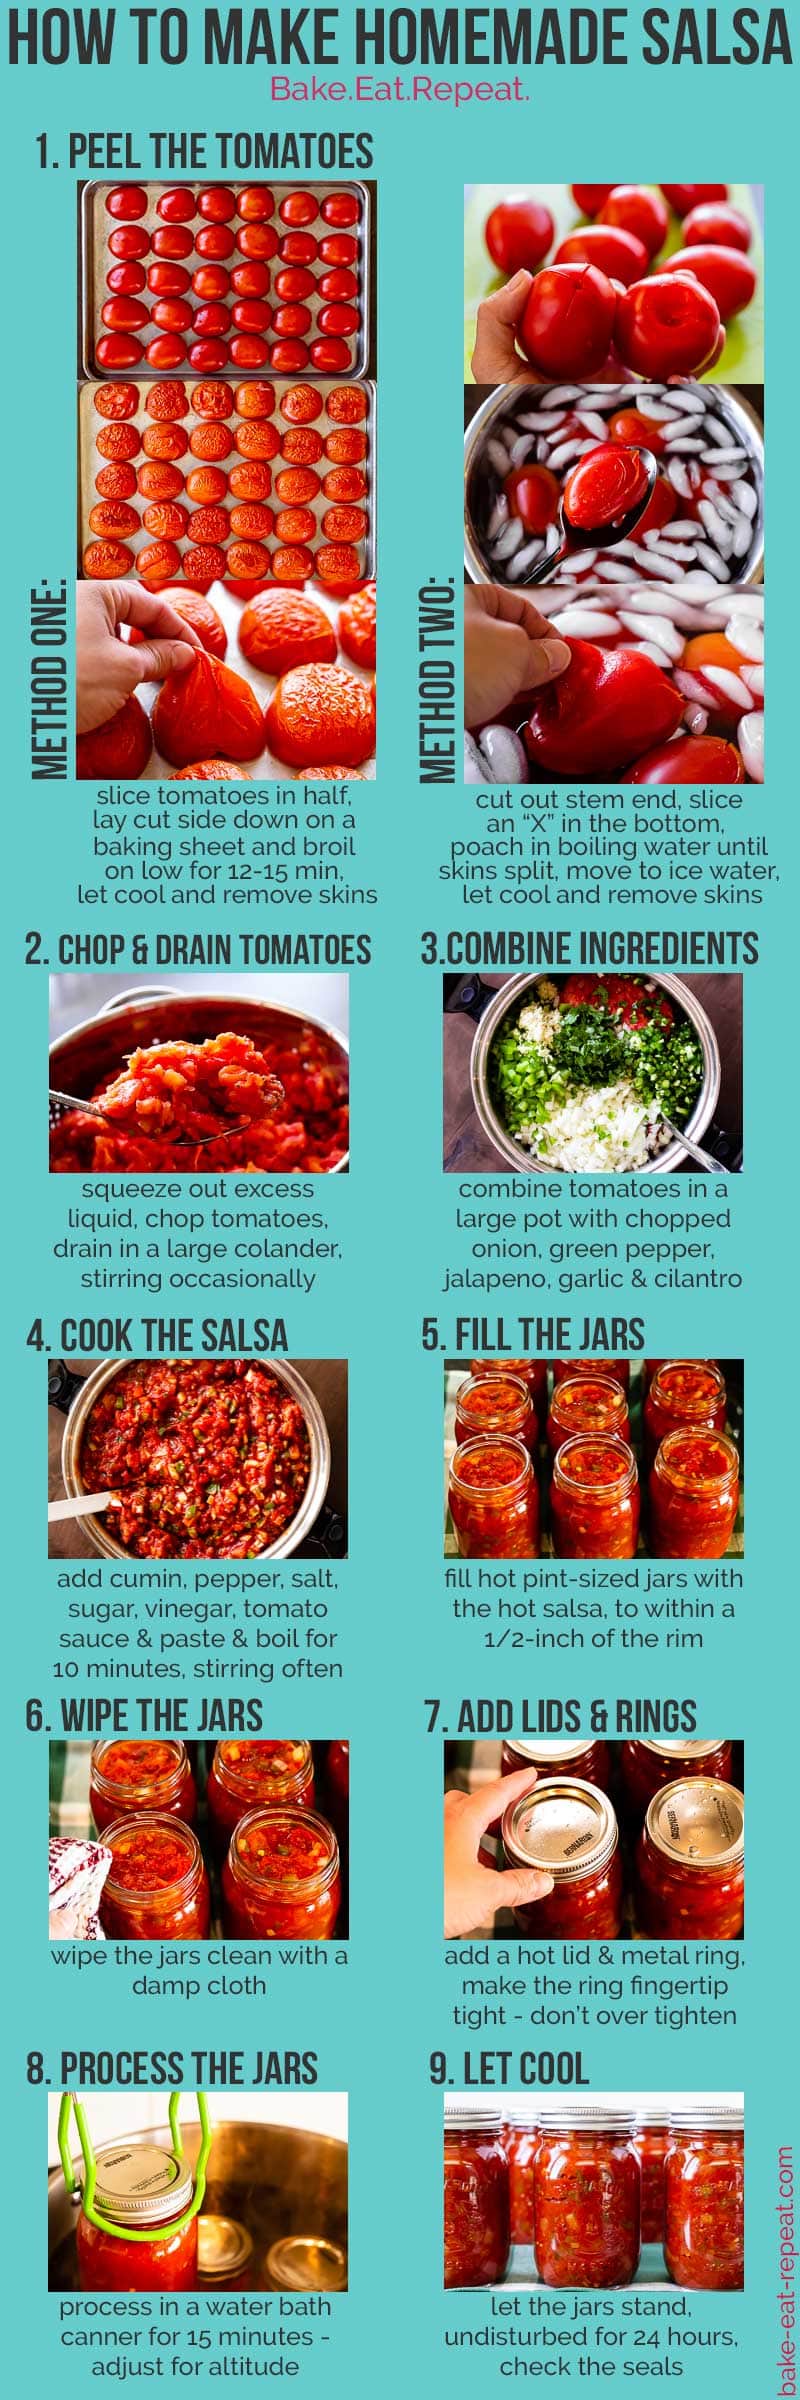 How Long to Process Salsa in Water Bath? 2